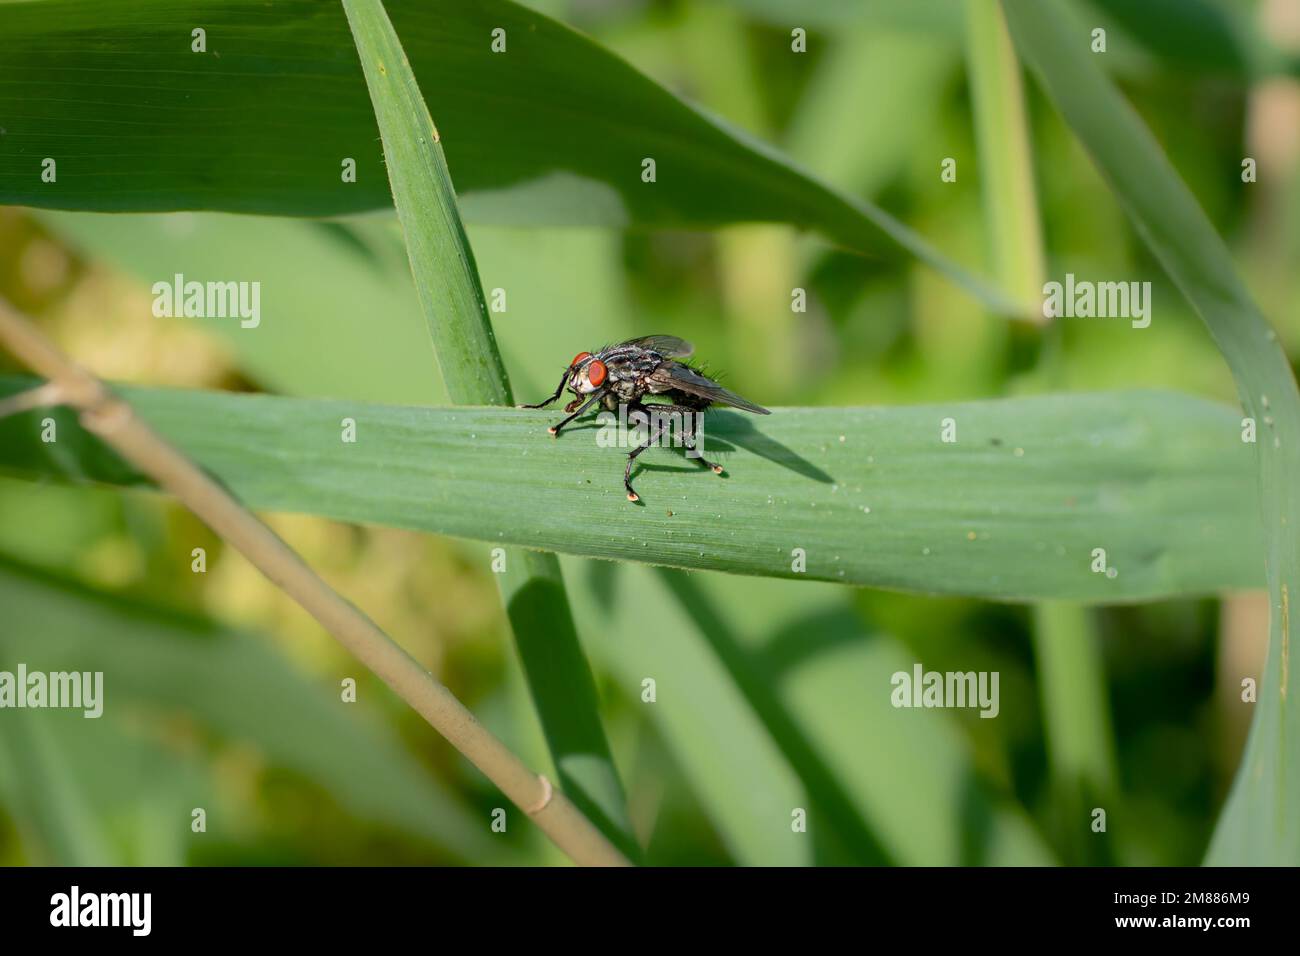 A flesh fly on a leaf, with large red compound eyes, proboscis, and big sticky feet Stock Photo